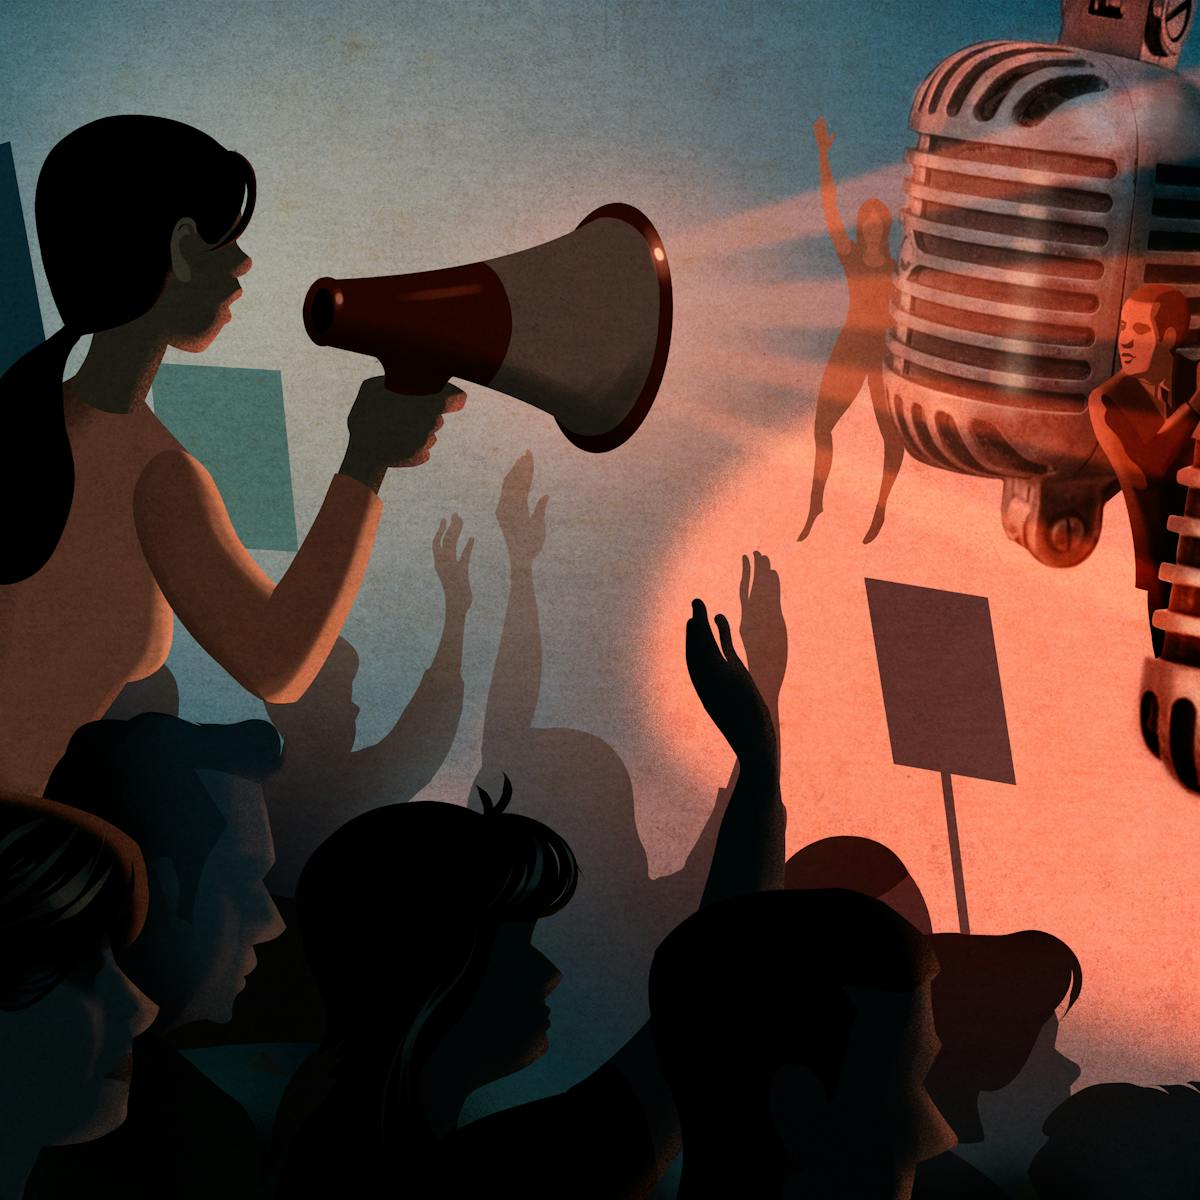 Illustration of a female figure on the left hand side who is rising up out of a larger crowd of people. She is holding a loudhailer to her mouth and speaking. The crowd are raising their hands in support, some hold placards. In front of the crowd are two over-scale broadcast microphones being held by 4 individuals pushing them slightly towards the crowd. The hues of the illustration are muted reds, blues and whites.